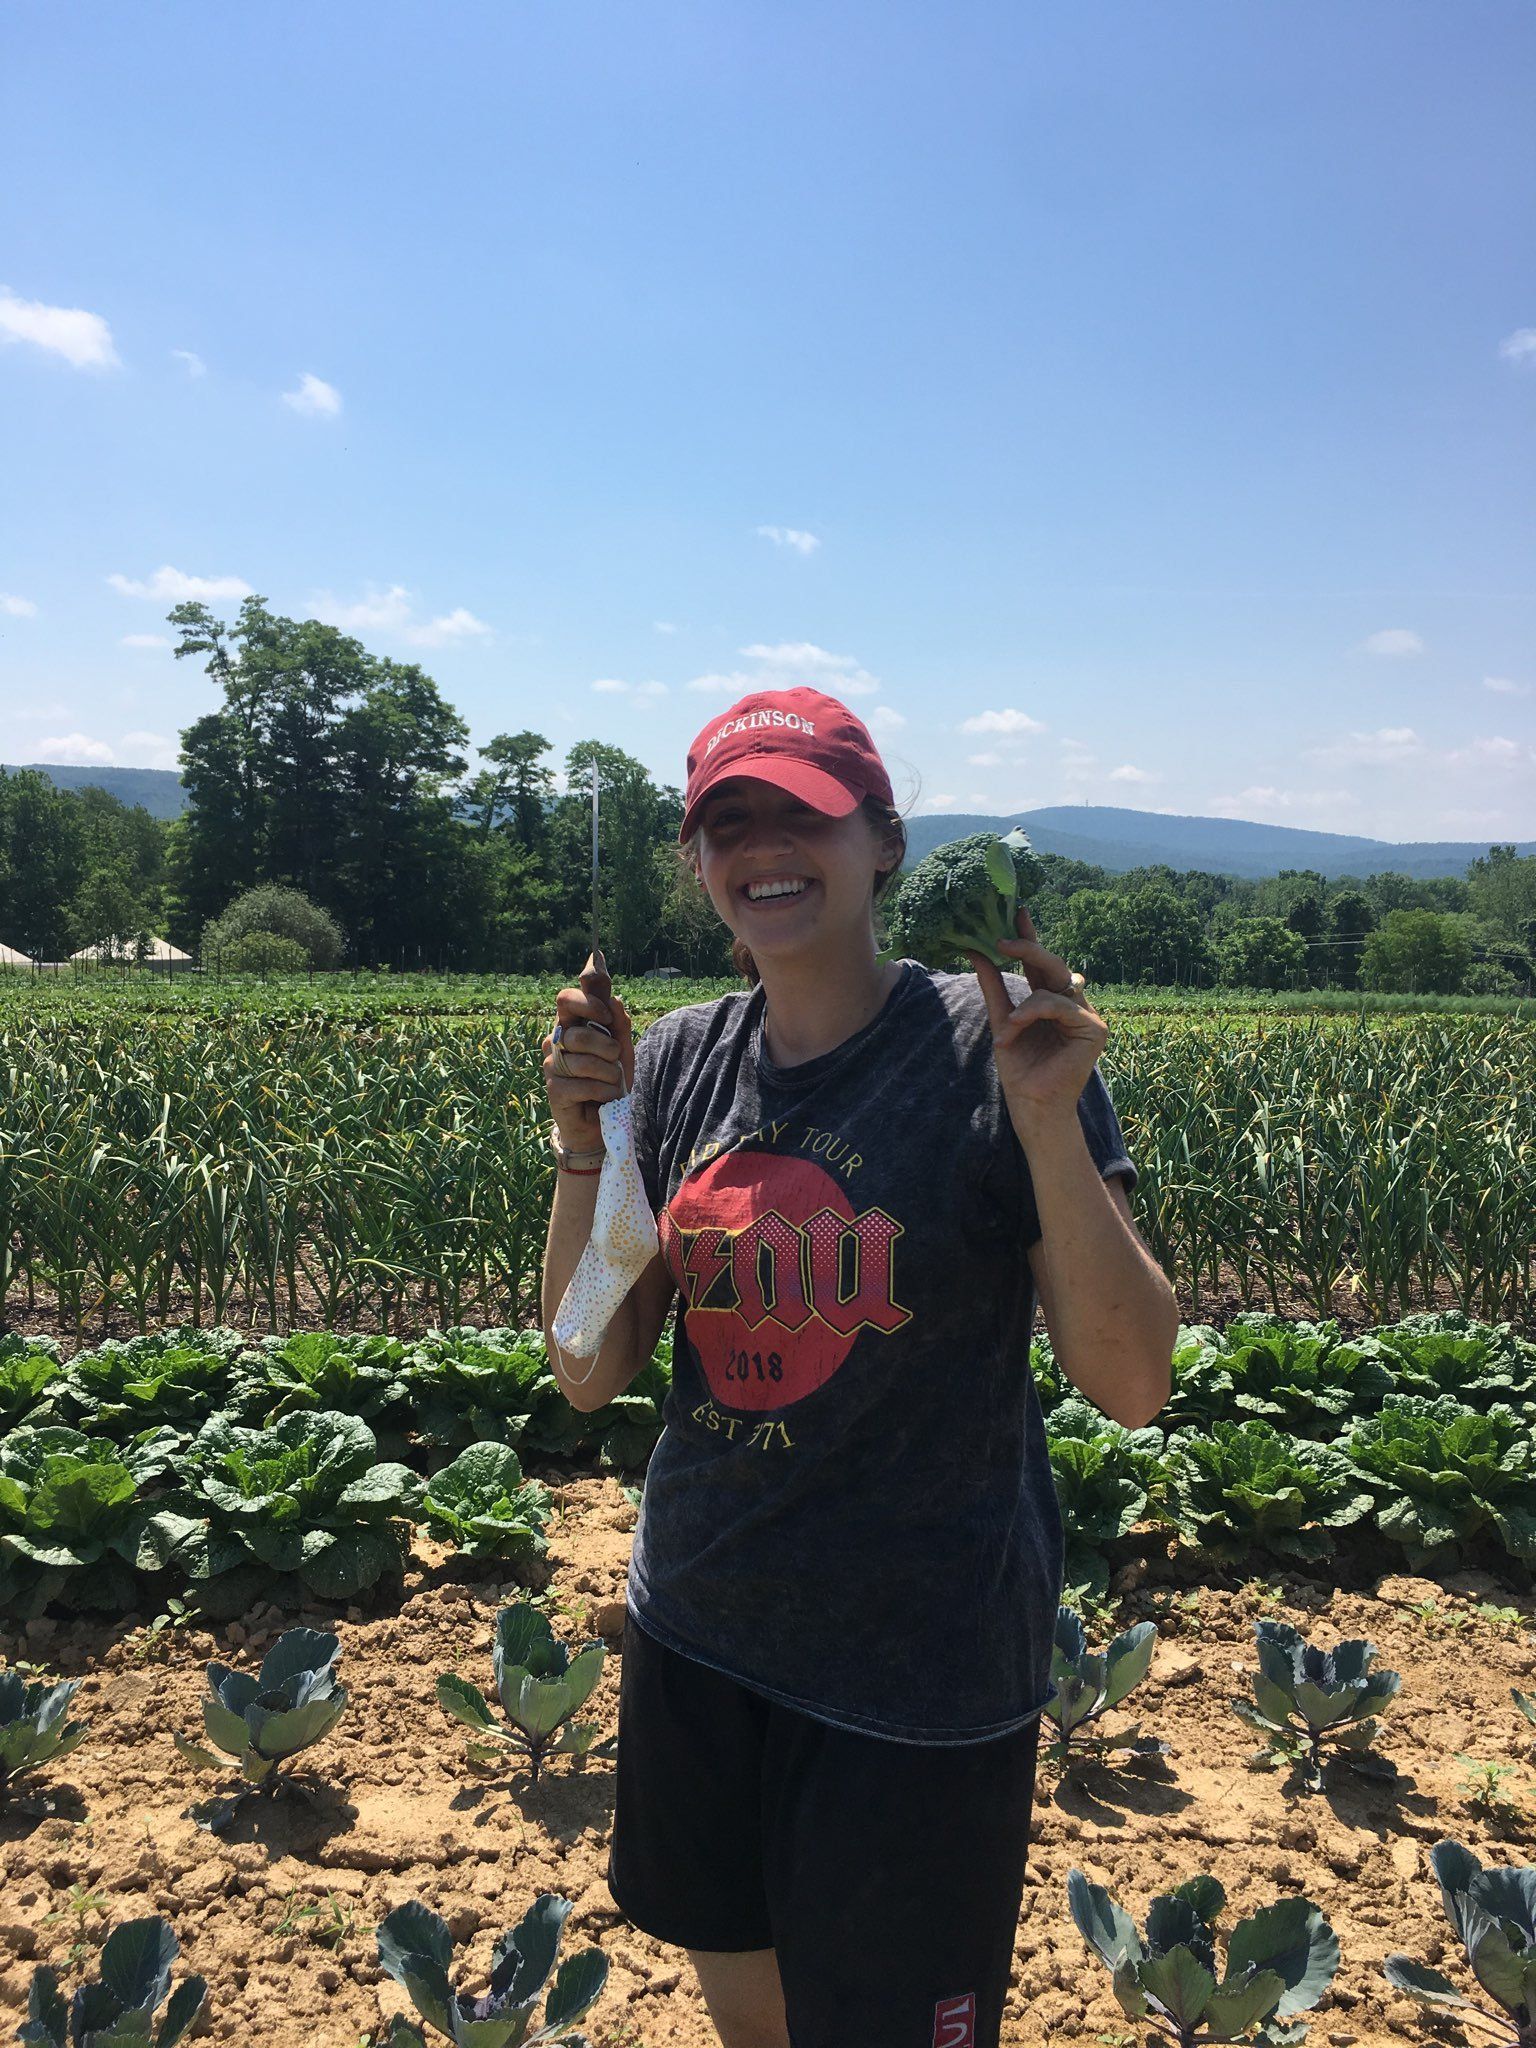 Previous Happening: Farm Happenings for July 3, 2020